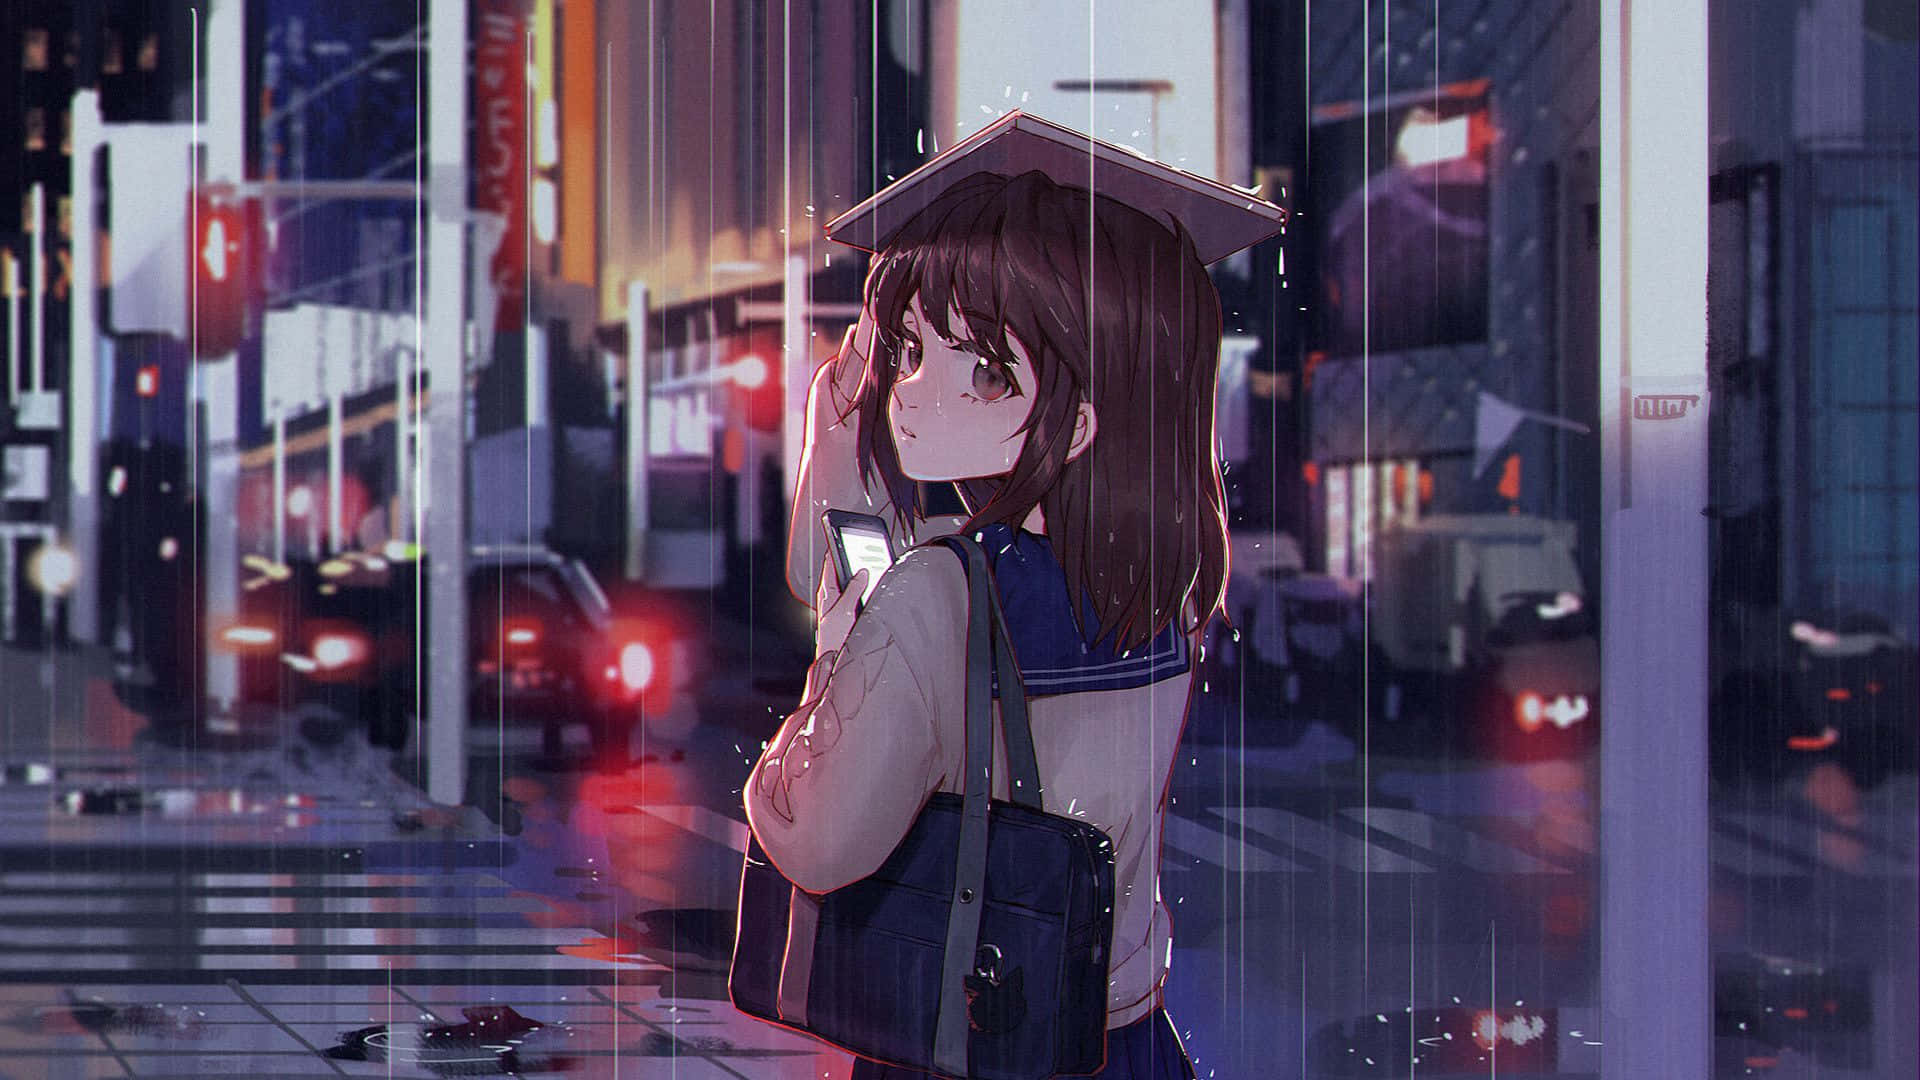 Anime Girl In The City While On A Rainy Day Picture